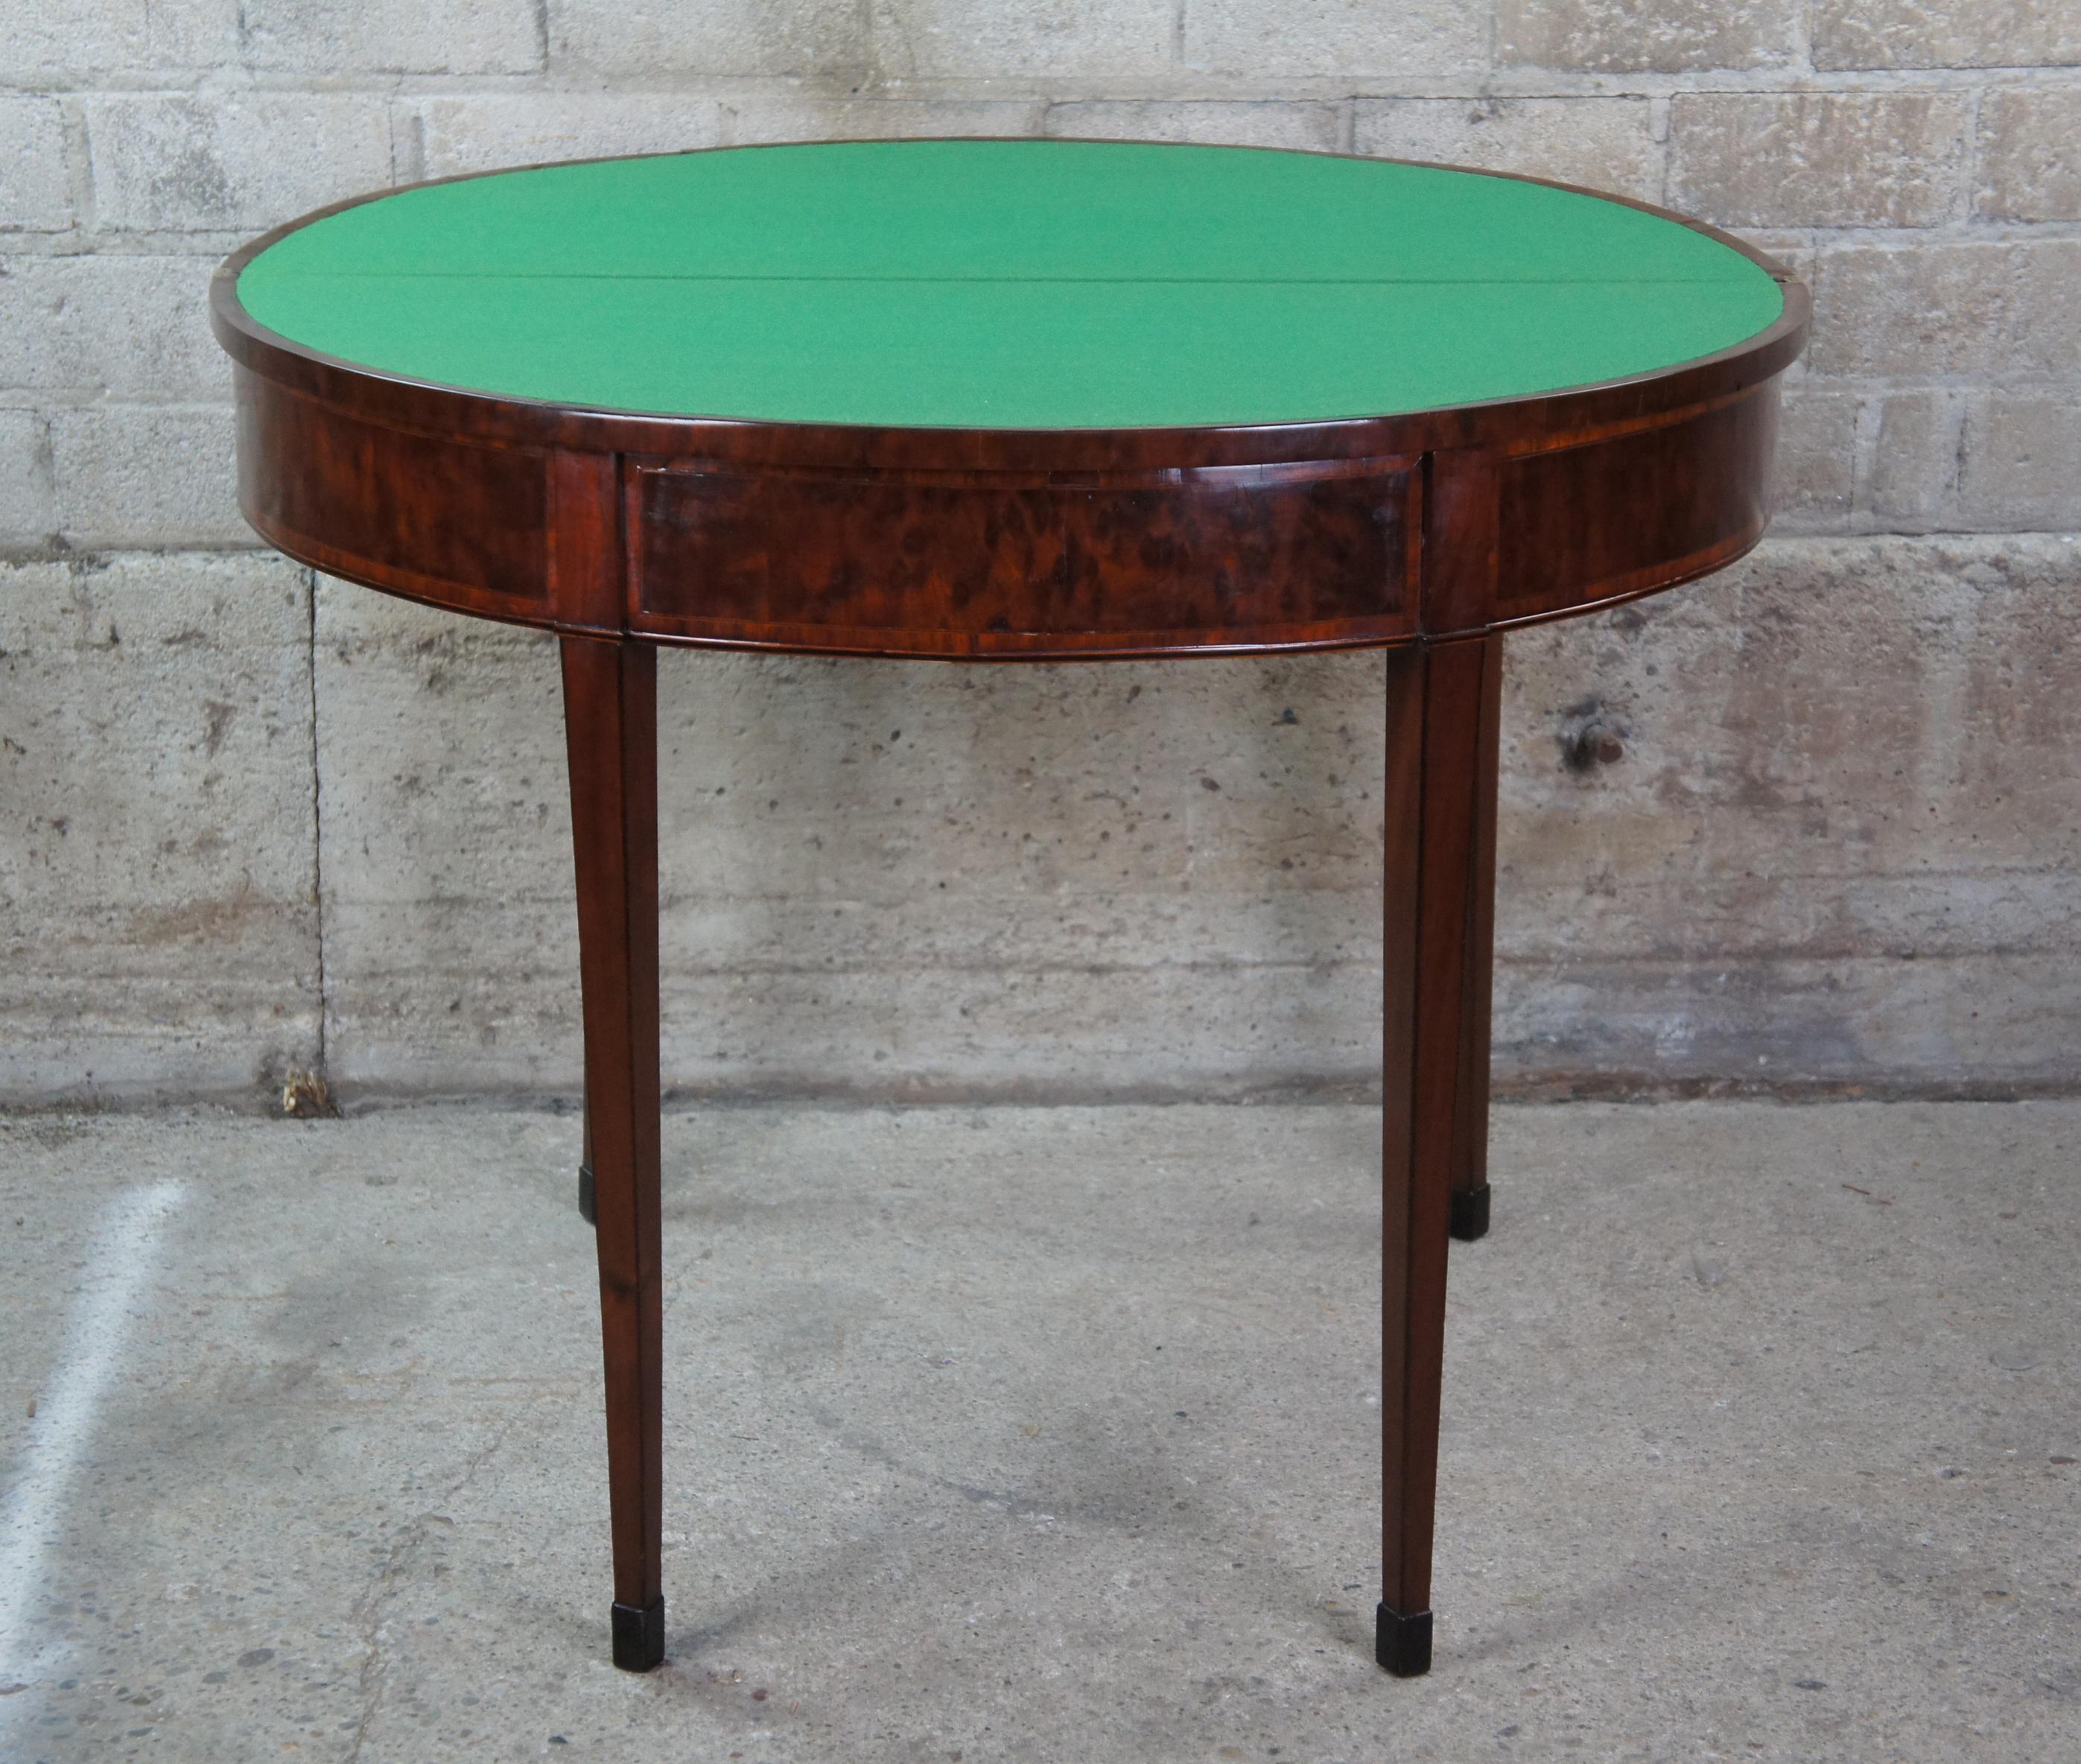 Antique Hepplewhite Plum Pudding Mahogany Demilune Console Game Table Federal In Good Condition For Sale In Dayton, OH